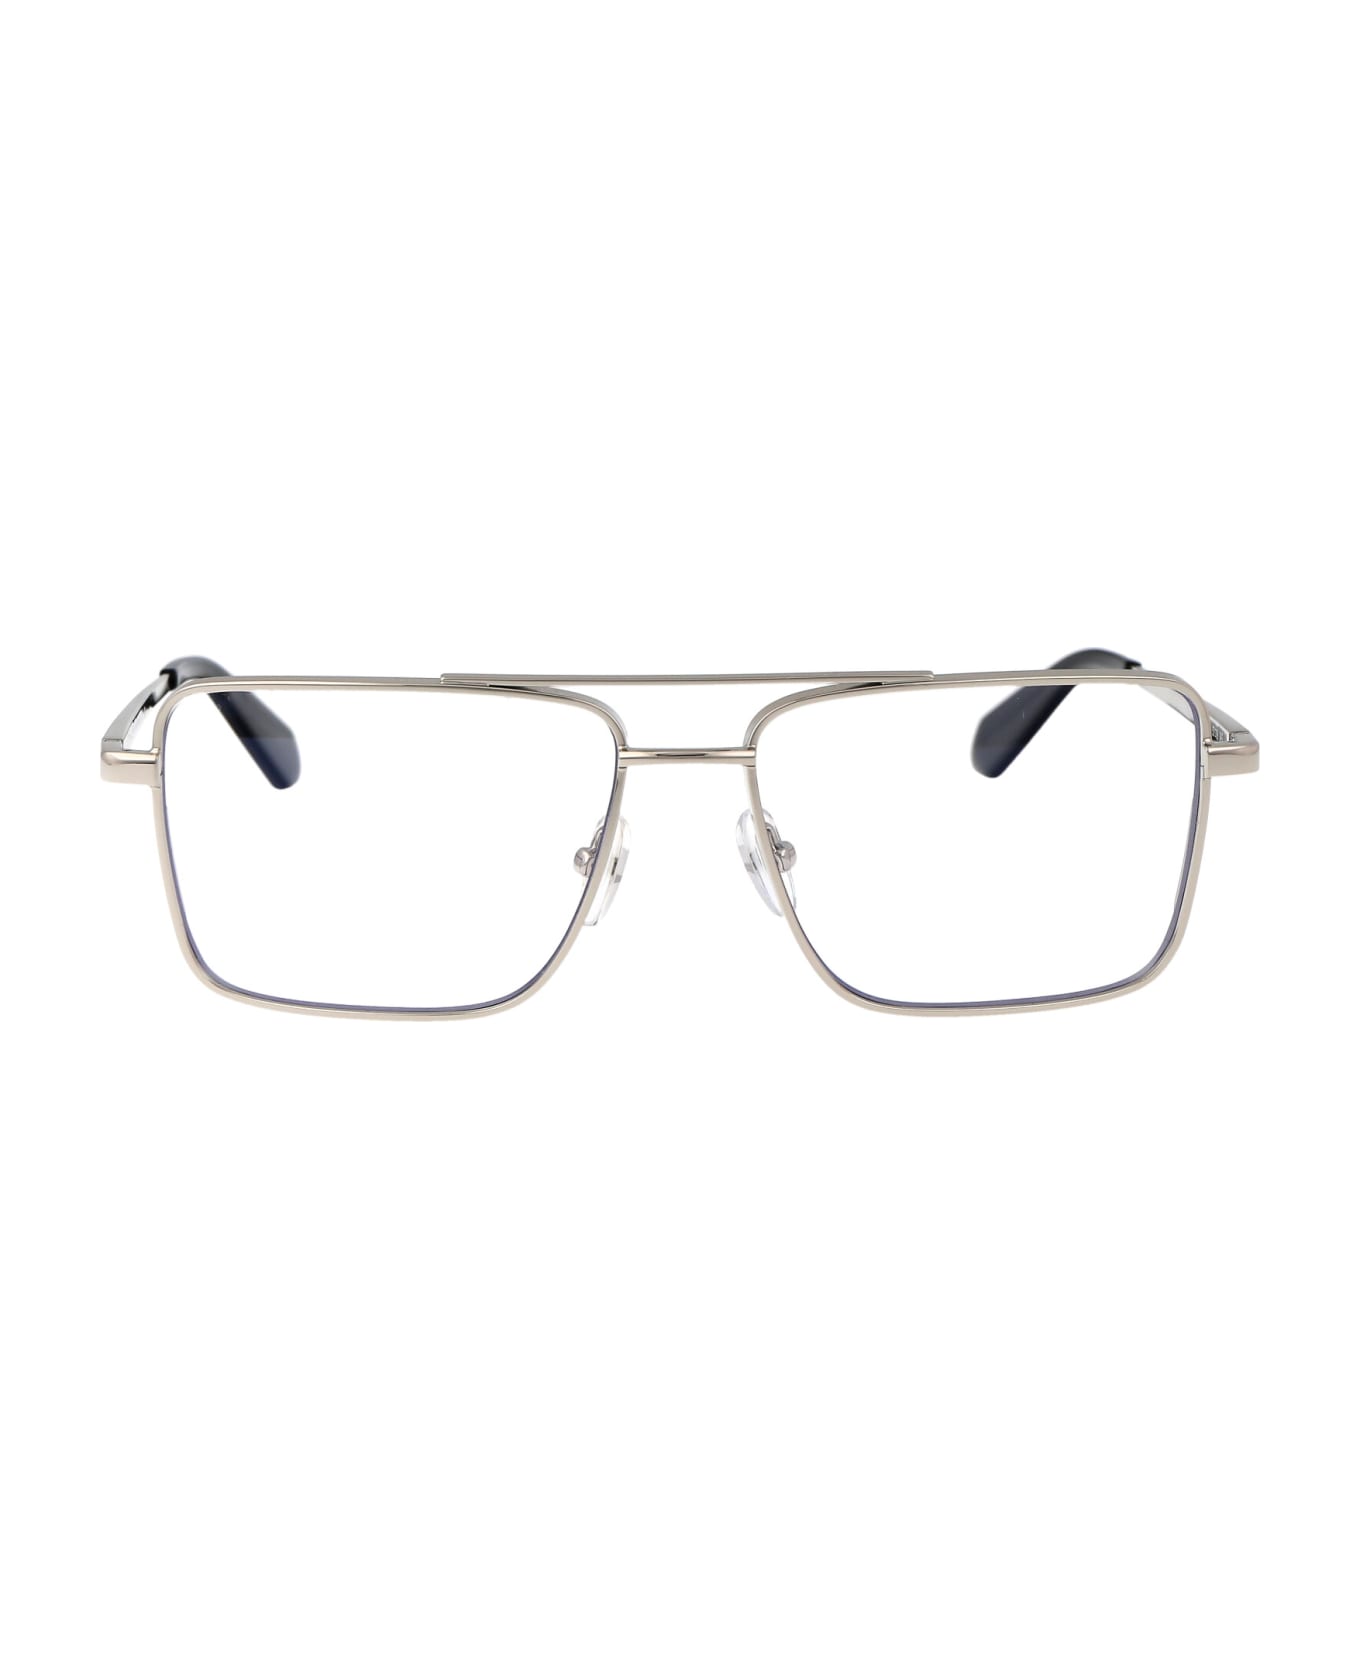 Off-White Optical Style 66 Glasses - 7200 SILVER アイウェア